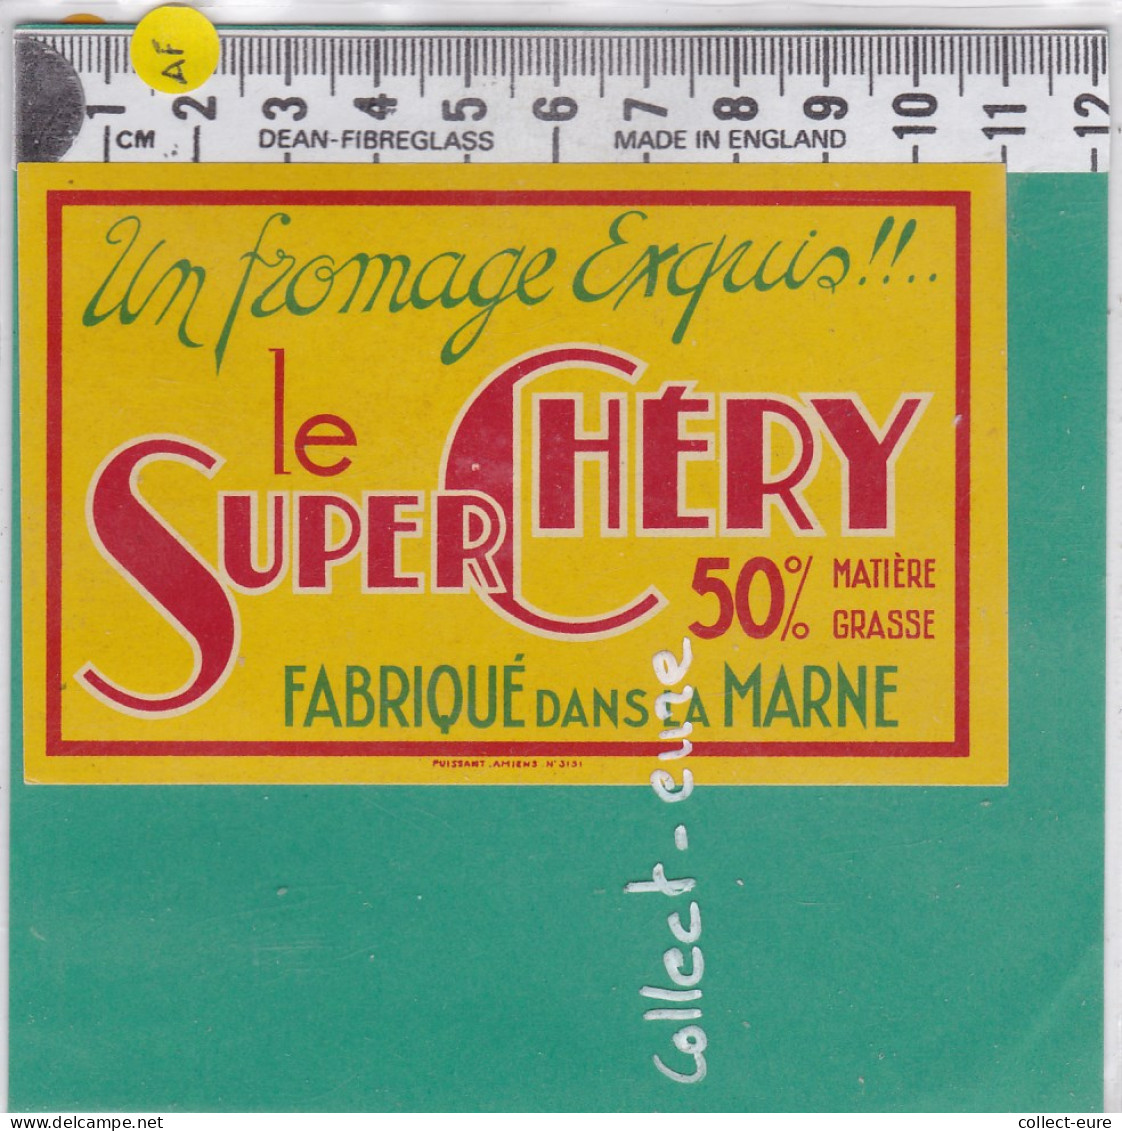 C1224 FROMAGE EXQUIS LE SUPER CHERY MARNE 50 % - Cheese